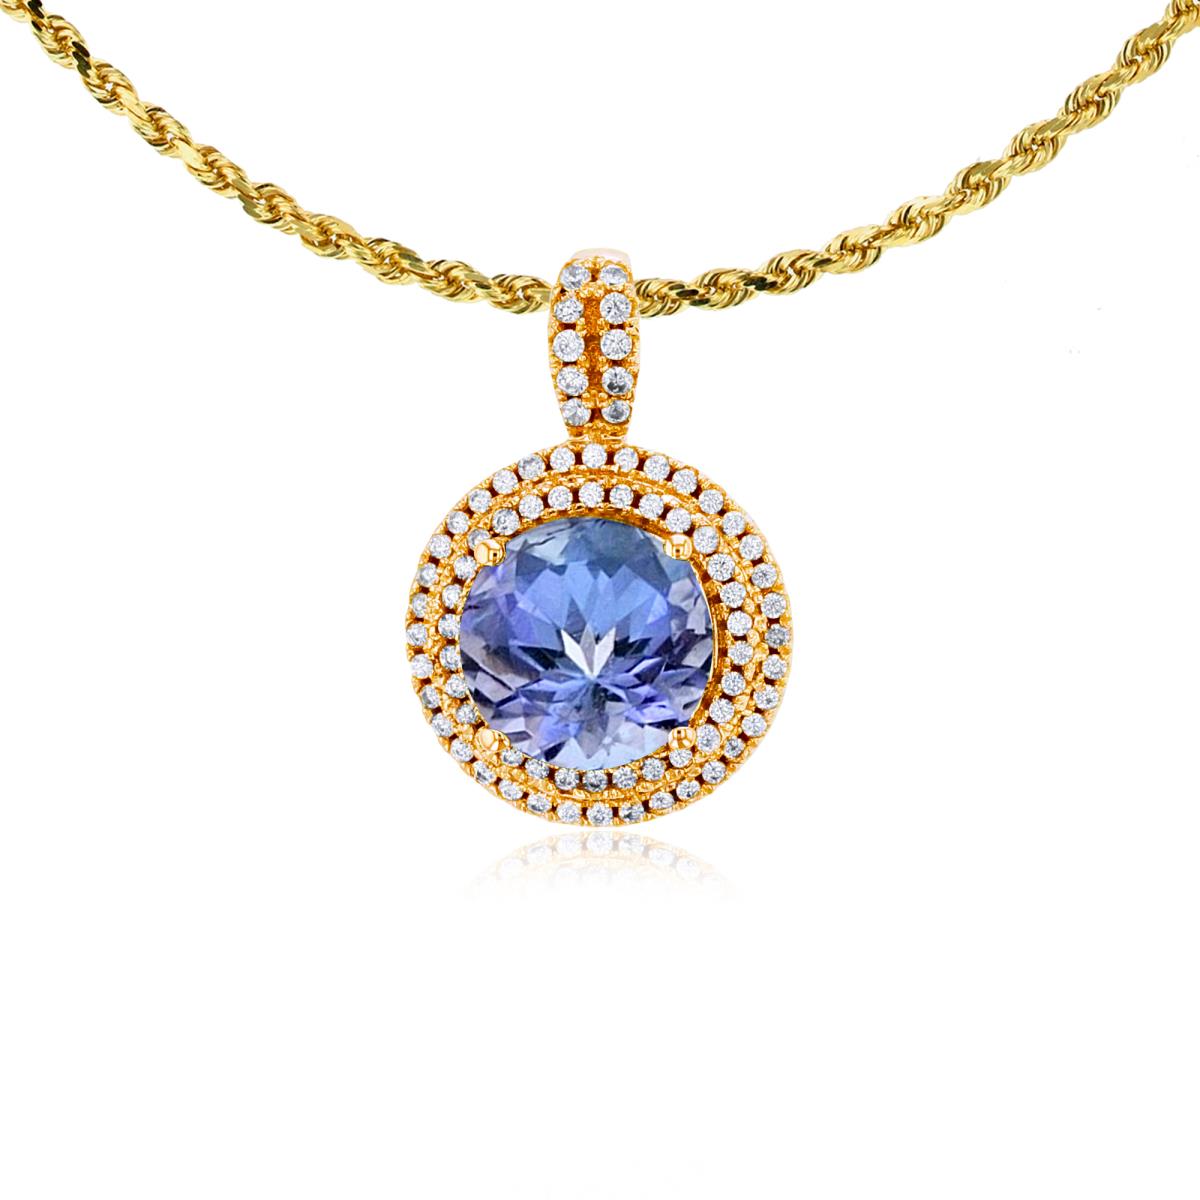 10K Yellow Gold 7mm Round Tanzanite & 0.25 CTTW Diamonds Double Halo 18" Rope Chain Necklace